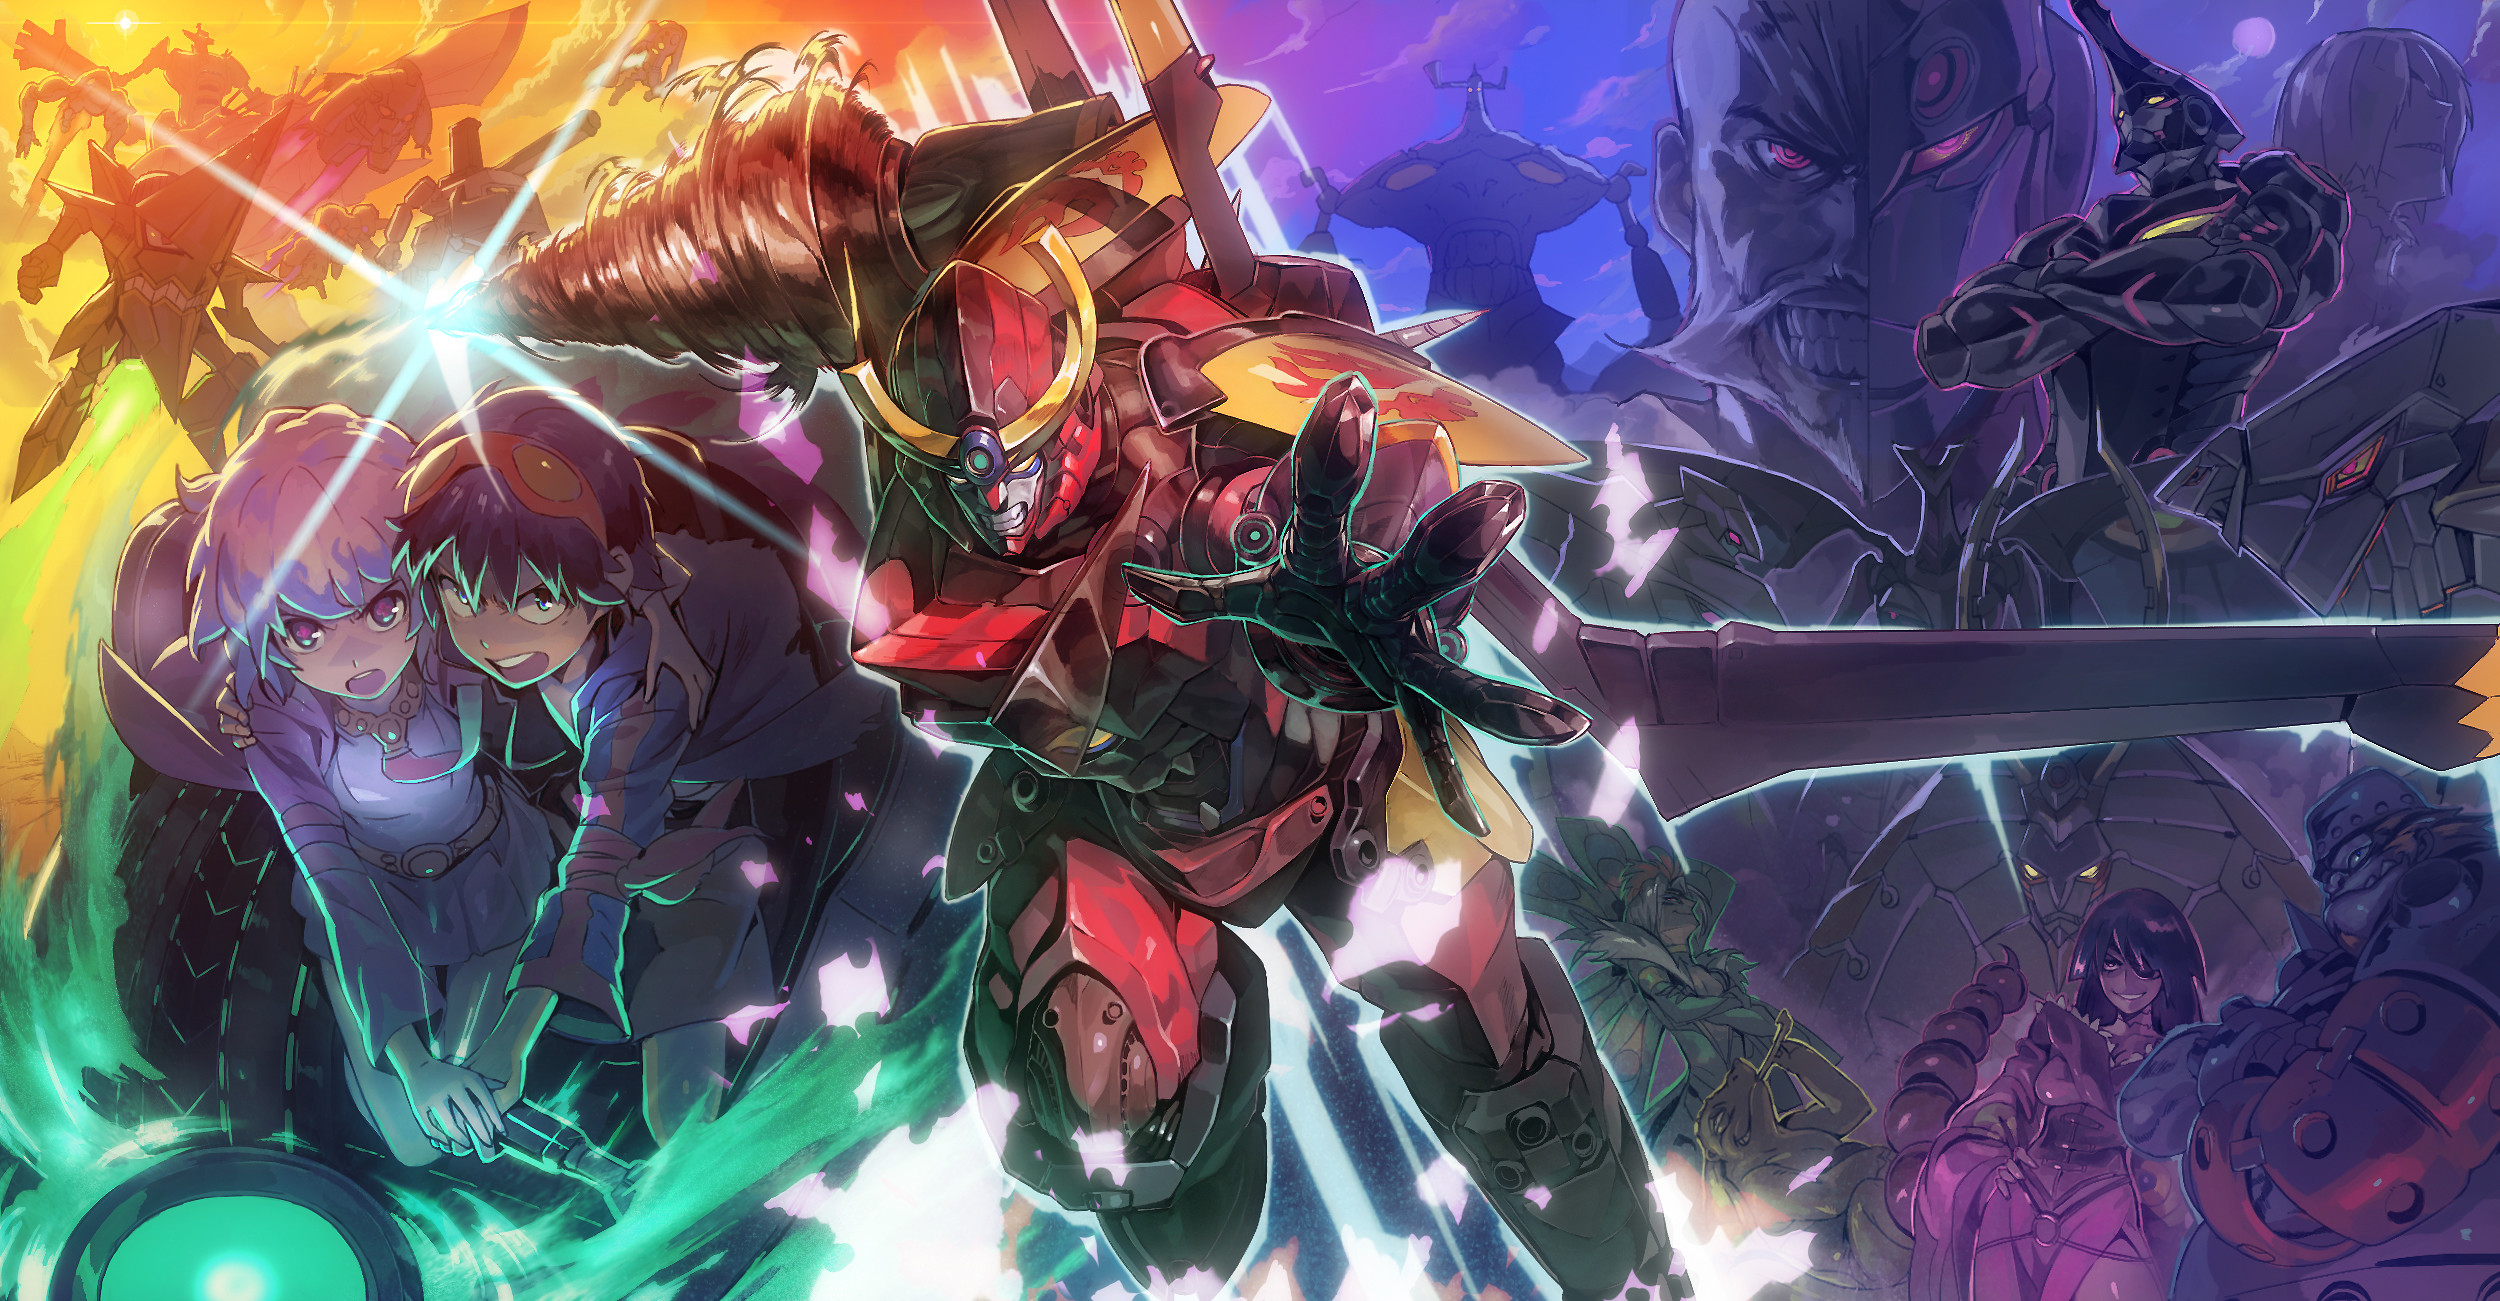 Tengen Toppa Gurren Lagann wallpapers and background images for desktop,  iPhone, Android and any screen resolution.